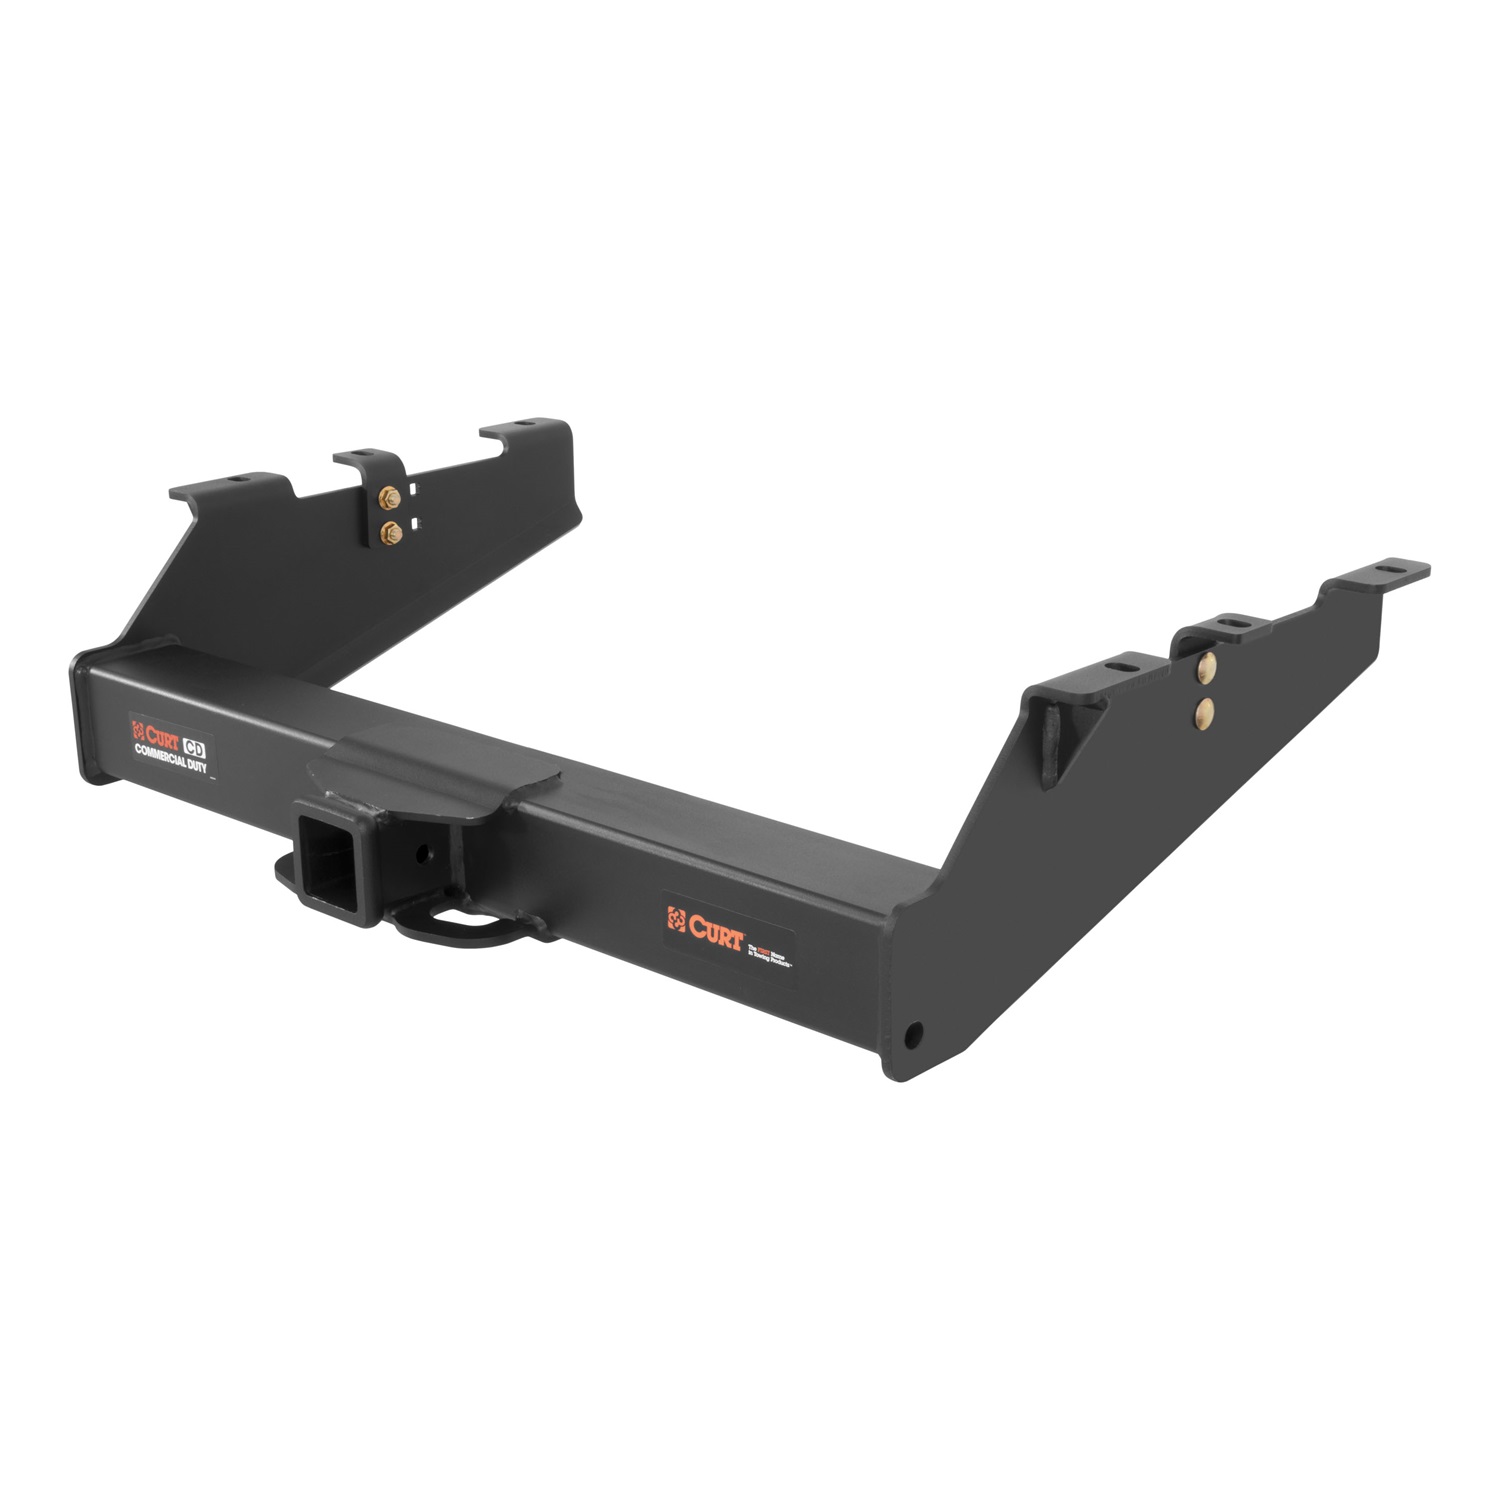 CURT Manufacturing CURT Manufacturing 15703 Class V; 2.5 in. Commercial Duty Hitch